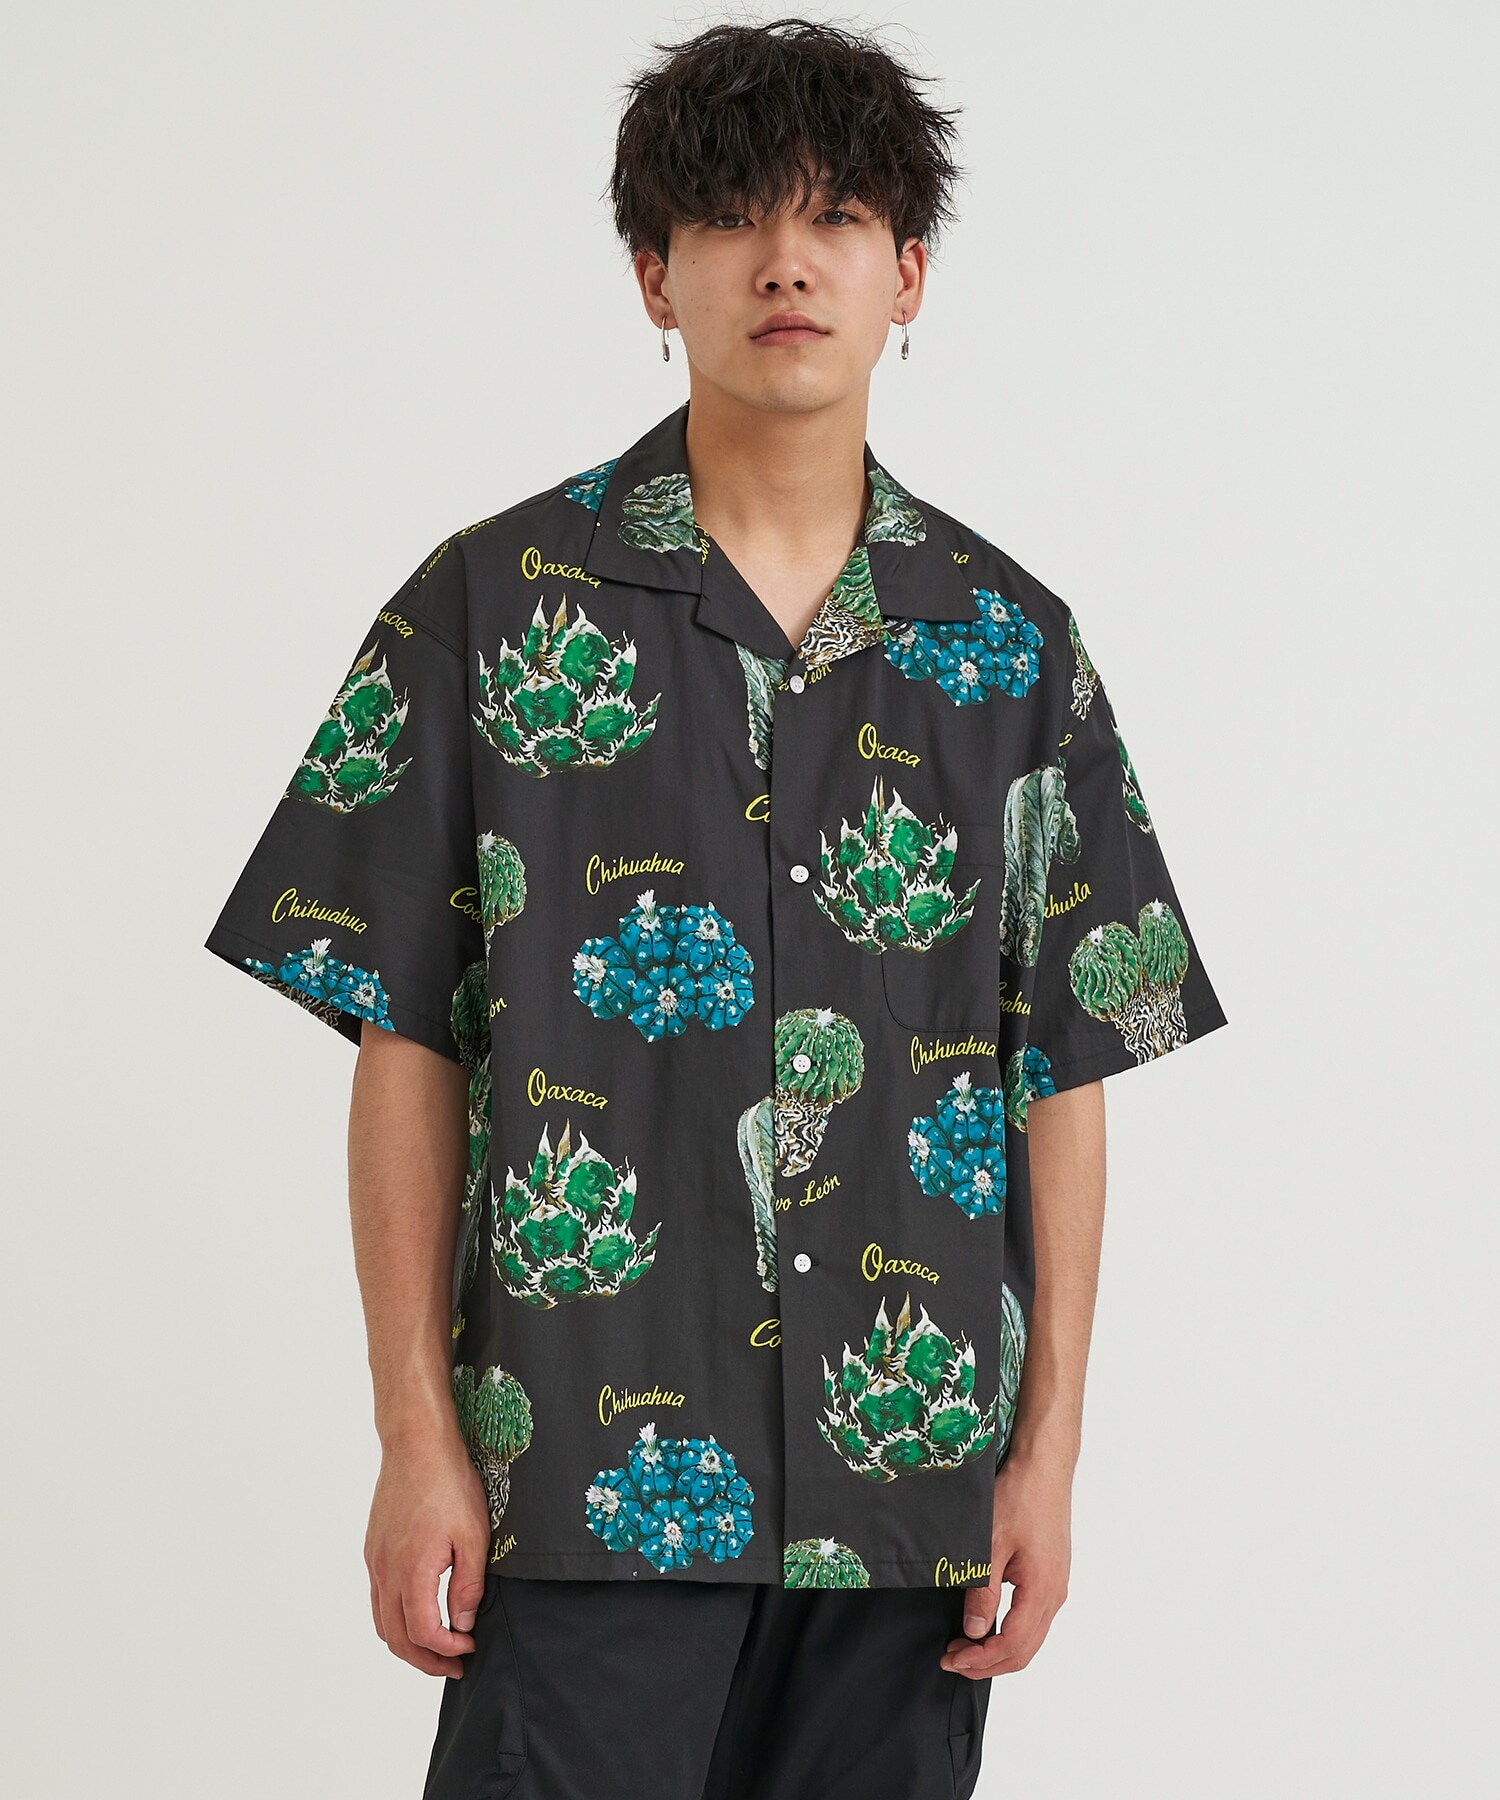 North and Central America S/S SHIRTS